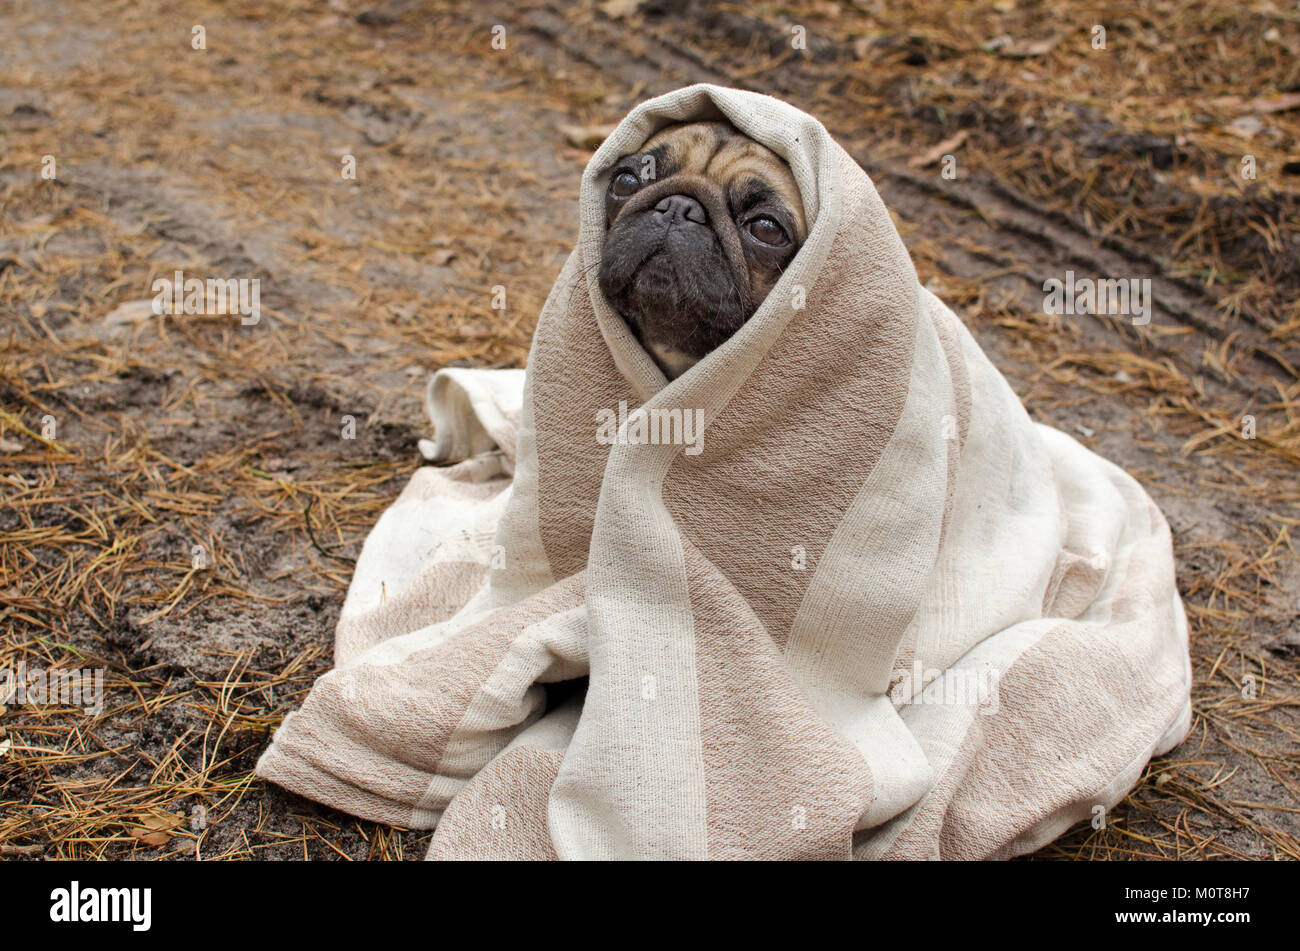 Cute Dog Breed Pug Wrapped In Blanket In Autumn Forest Stock Photo Alamy